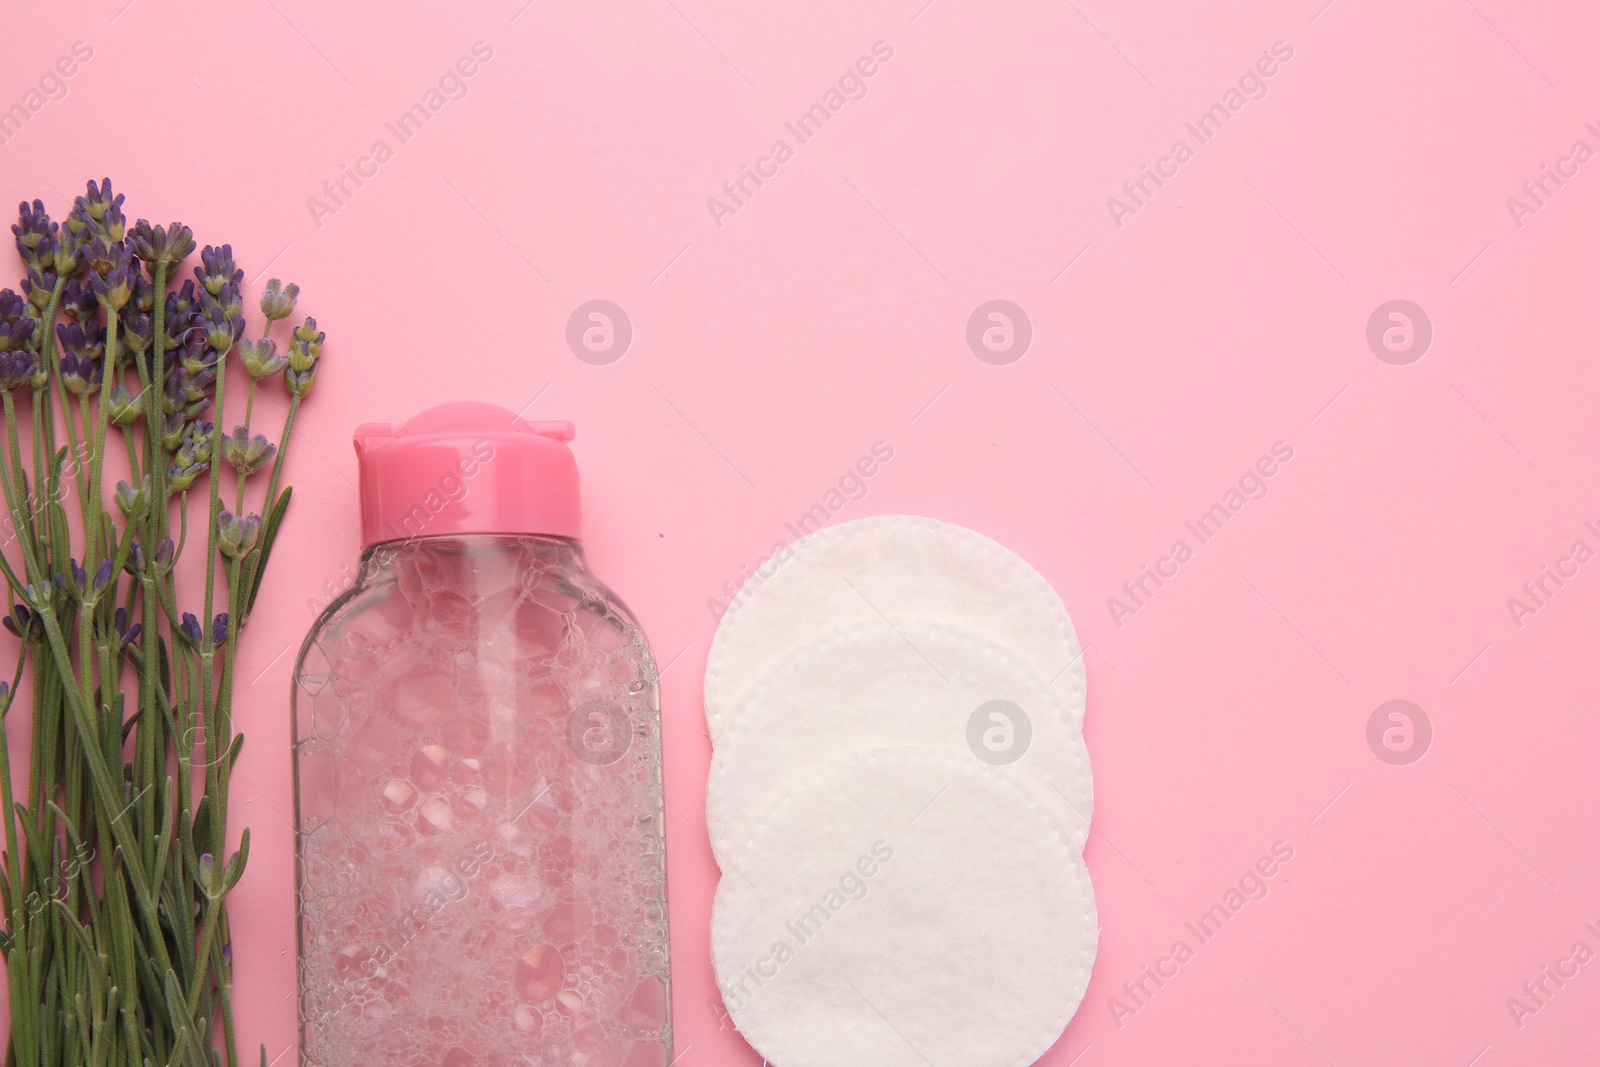 Photo of Bottle of makeup remover, cotton pads and lavender on pink background, flat lay. Space for text